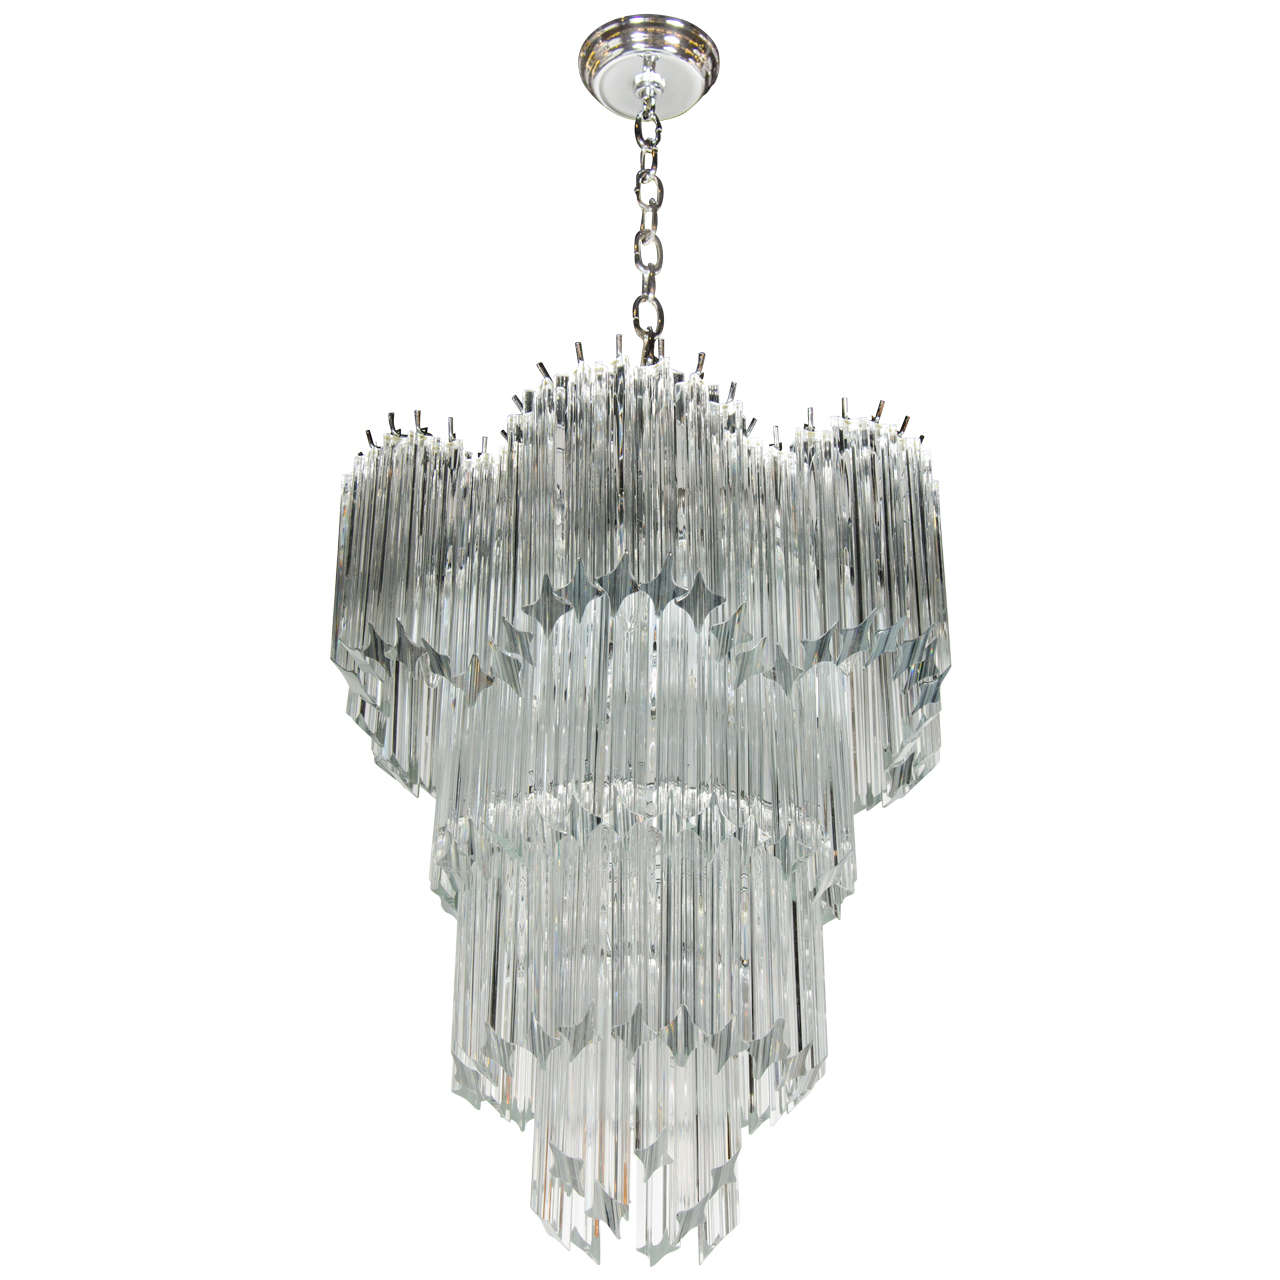 Mid-Century Modernist Scalloped Four-Tier Cut Triedre Crystal Camer Chandelier